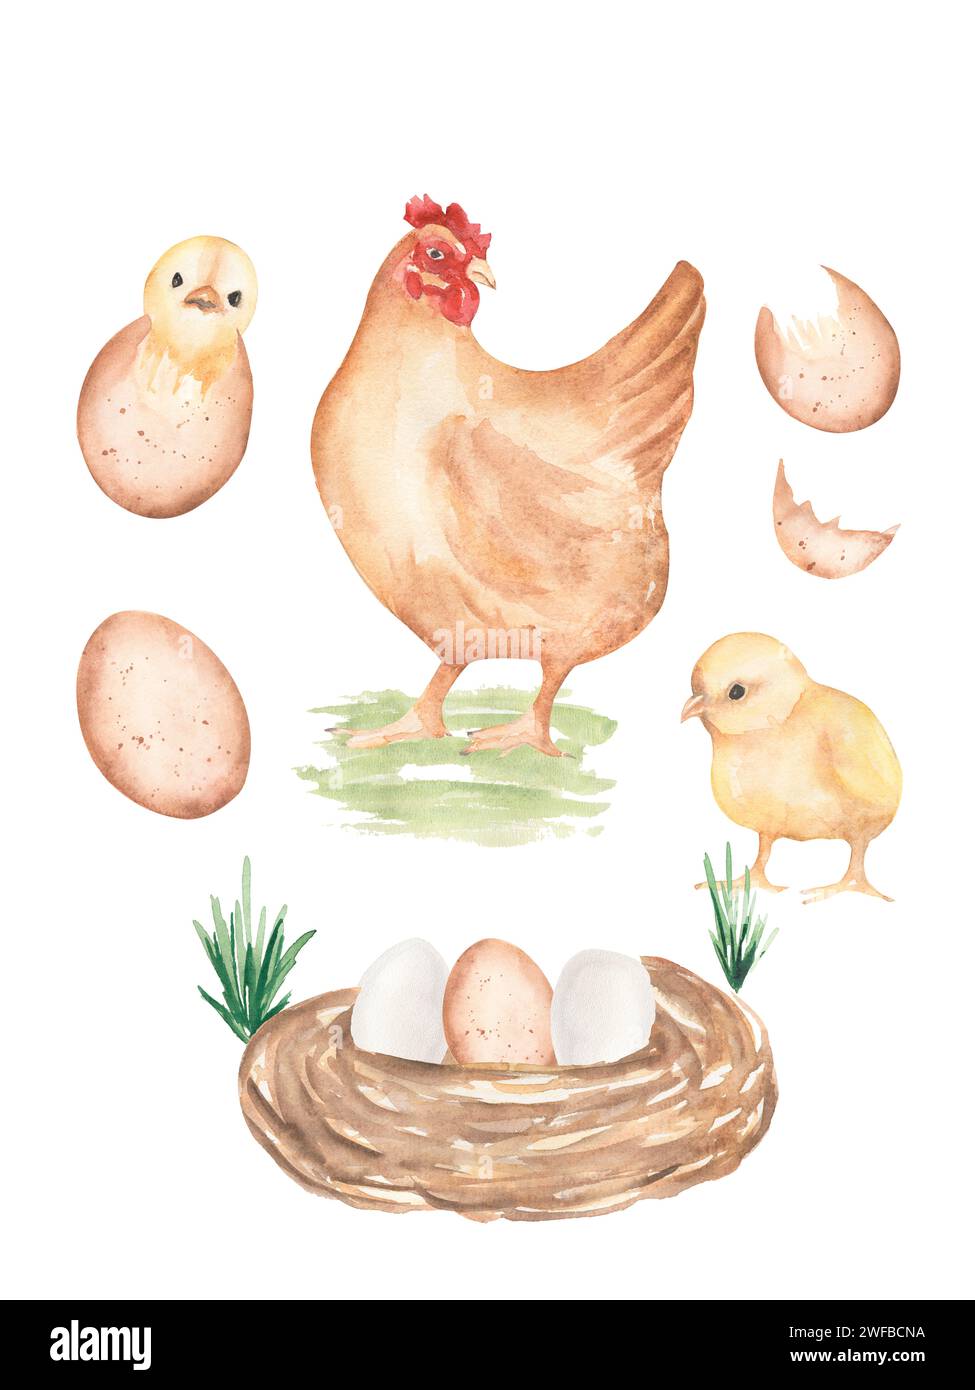 Watercolor chicken life cycle stages illustration, cute kids infographic composition from fertile eggs embryo development to hatching chicks, hand pai Stock Photo